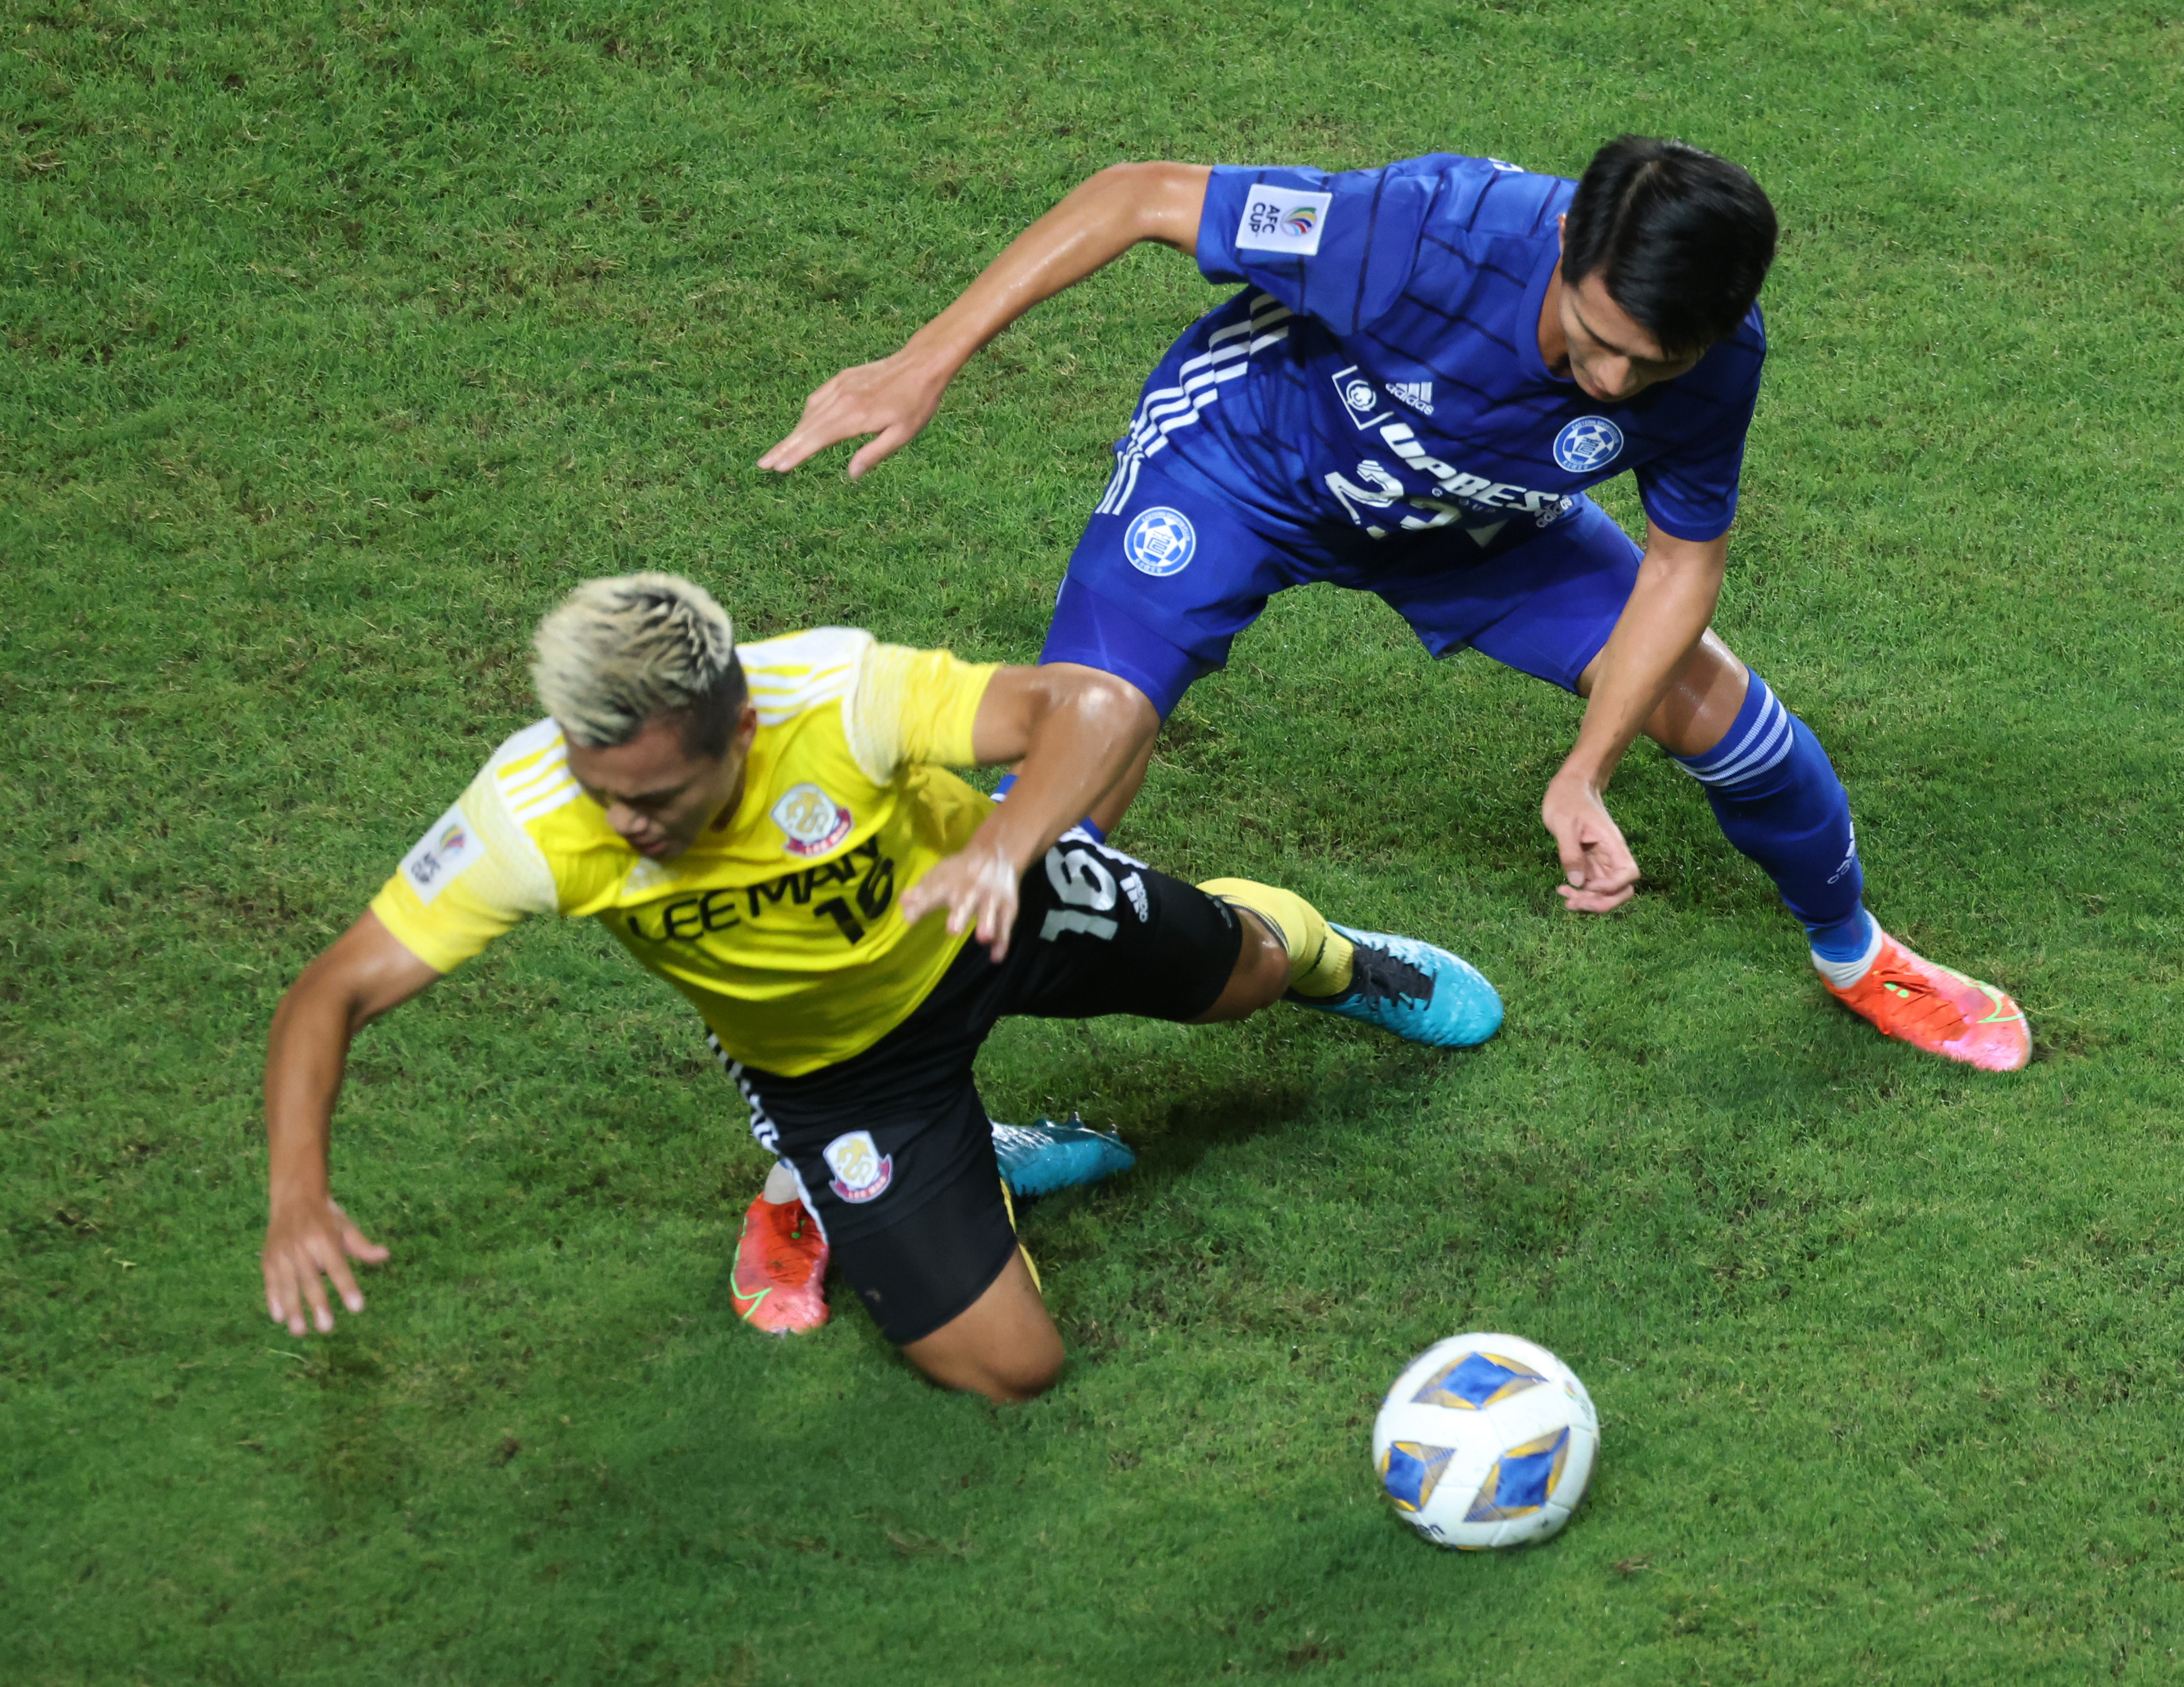 Lee Man’s Ngan Lok-fung (left) battles for the ball with Eastern Long Lions’ Wong Wai during their AFC Cup Group J match at Hong Kong Stadium on June 23, 2021. Photo: K. Y. Cheng